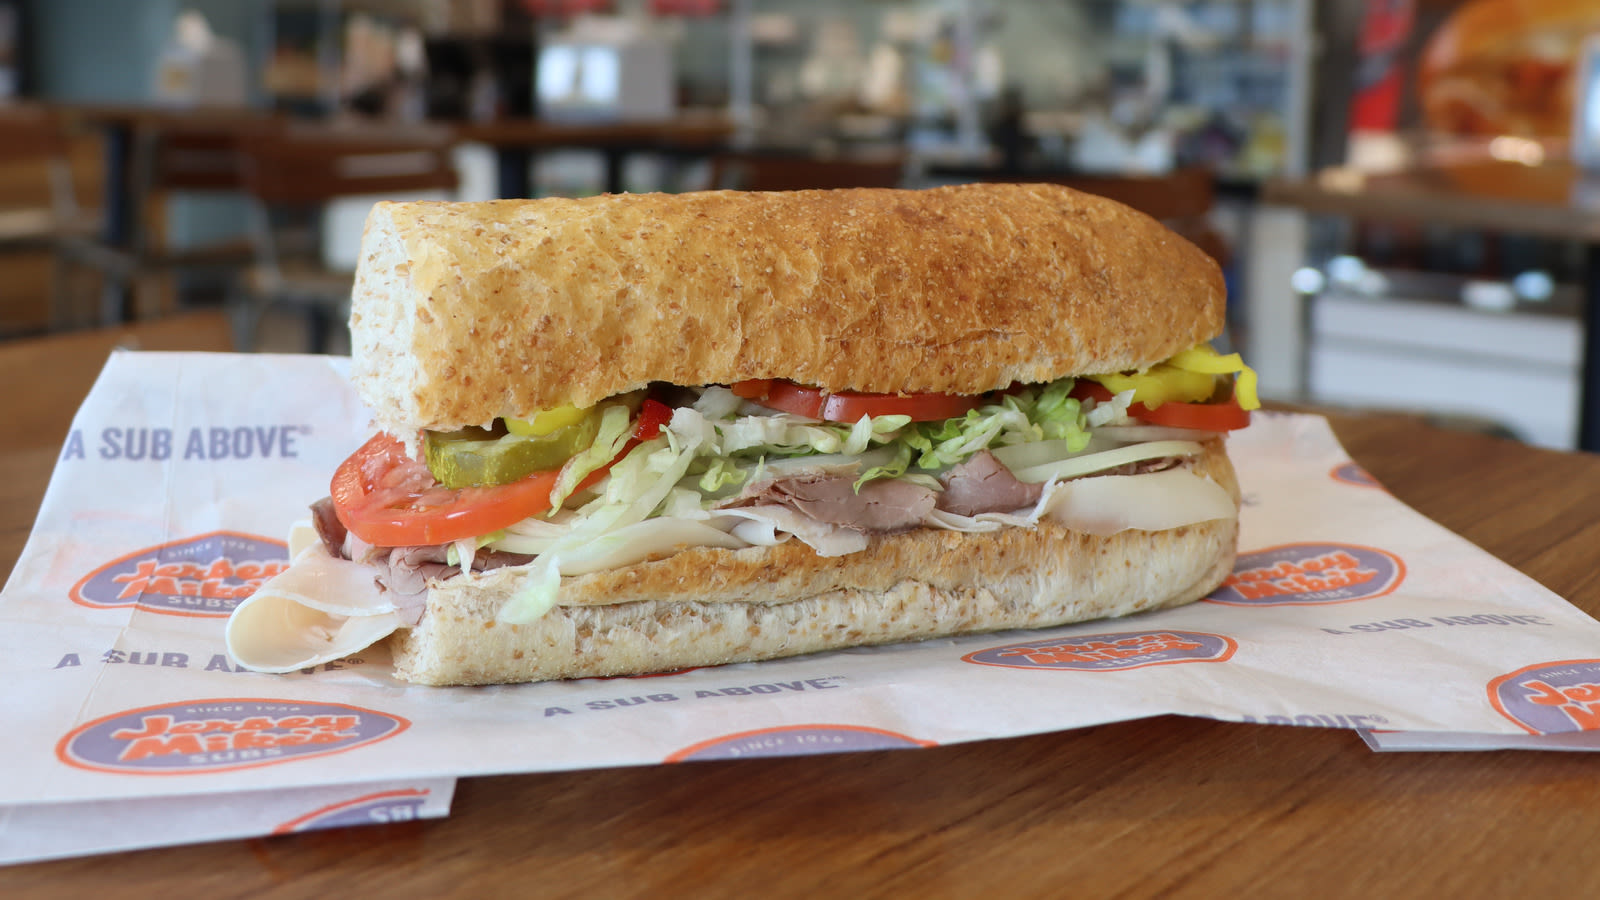 Mike's Way At Jersey Mike's, Explained